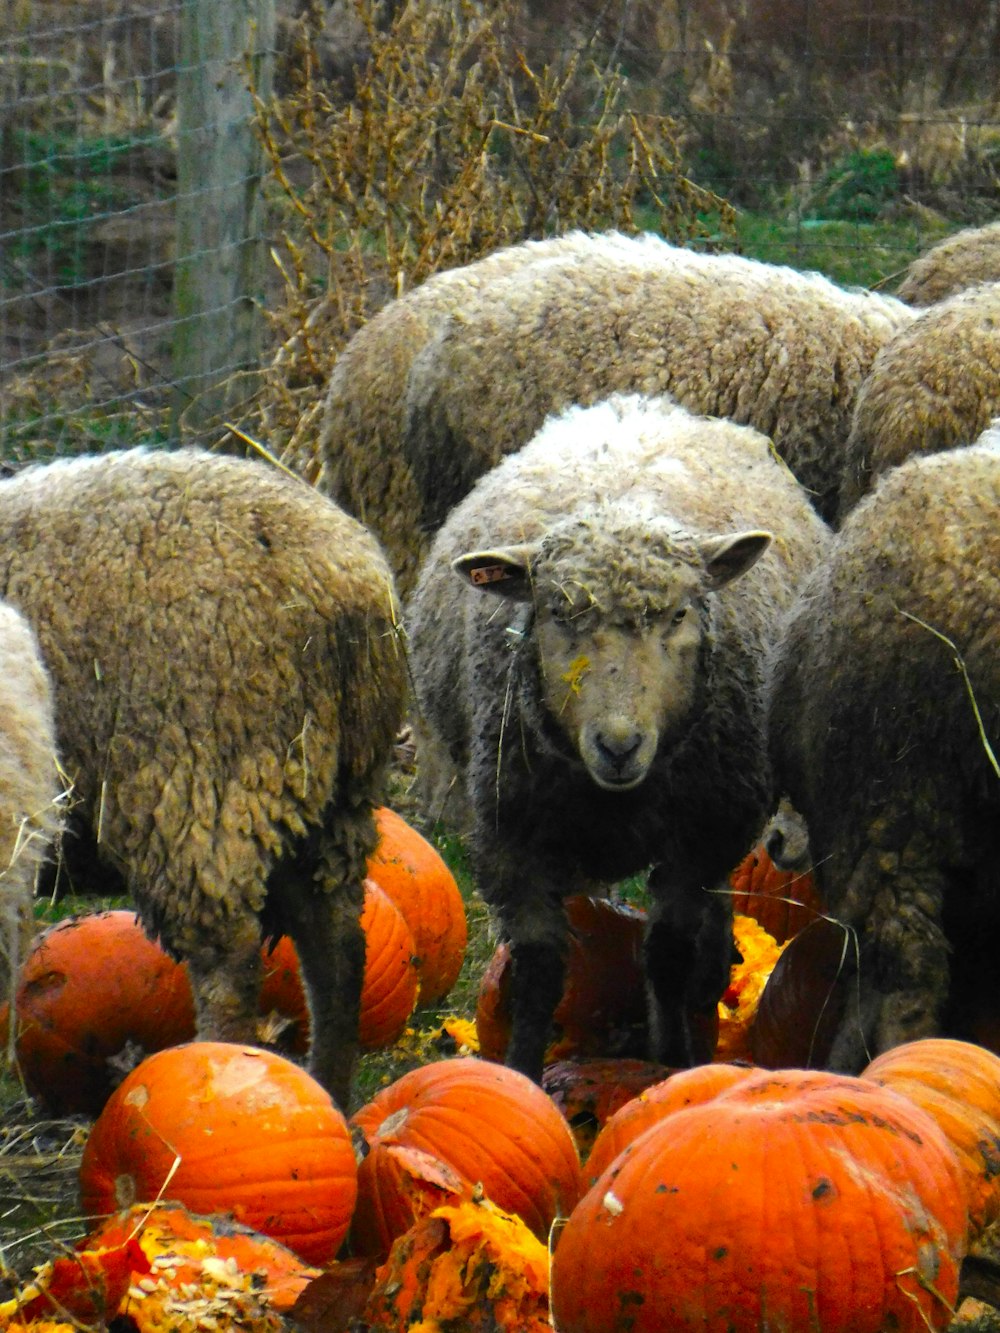 a herd of sheep standing next to a pile of pumpkins